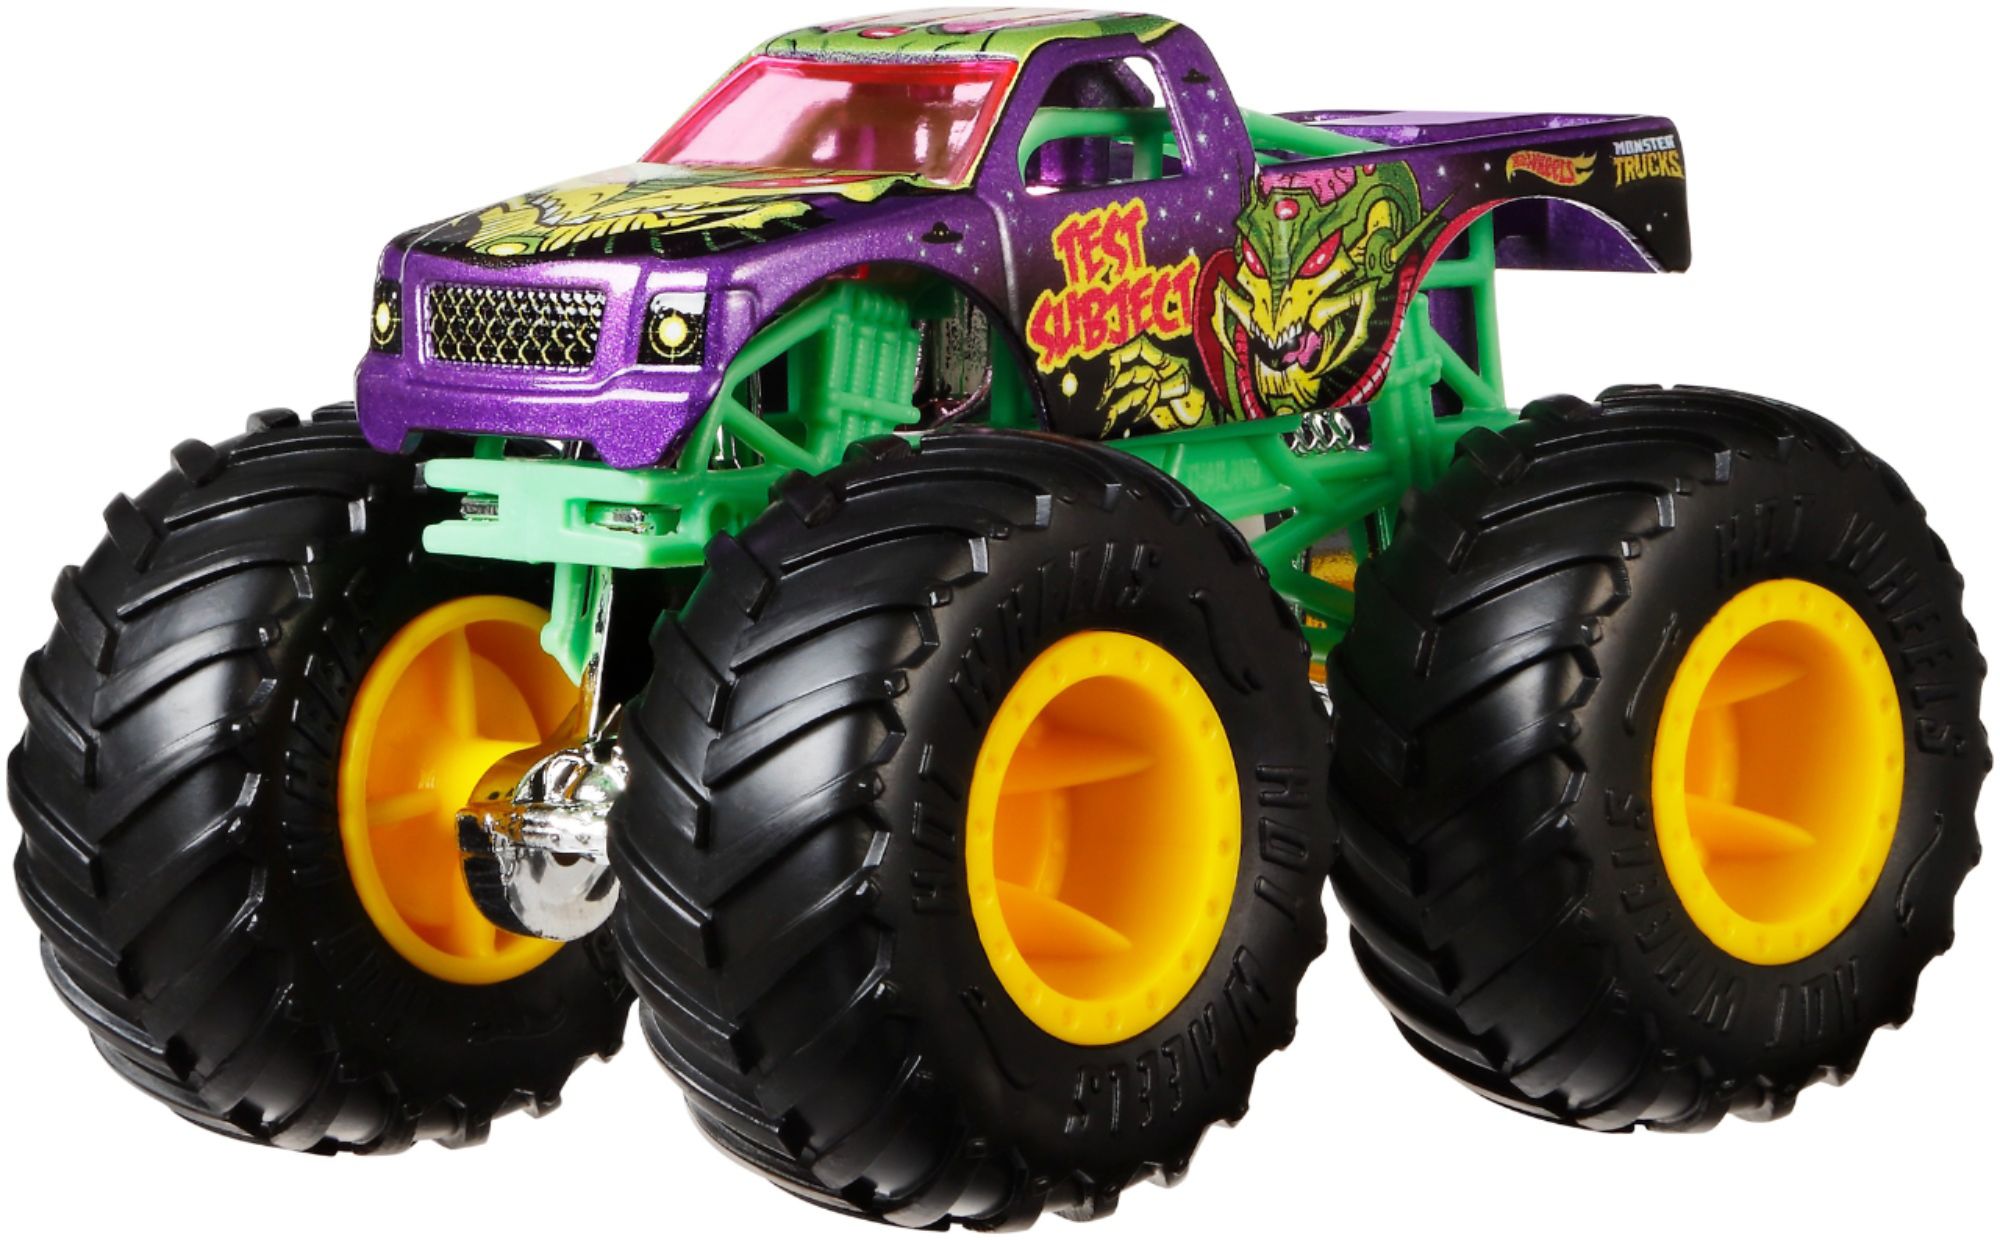 Hot Wheels Monster Trucks Collection Styles May Vary FYJ44 - Best Buy